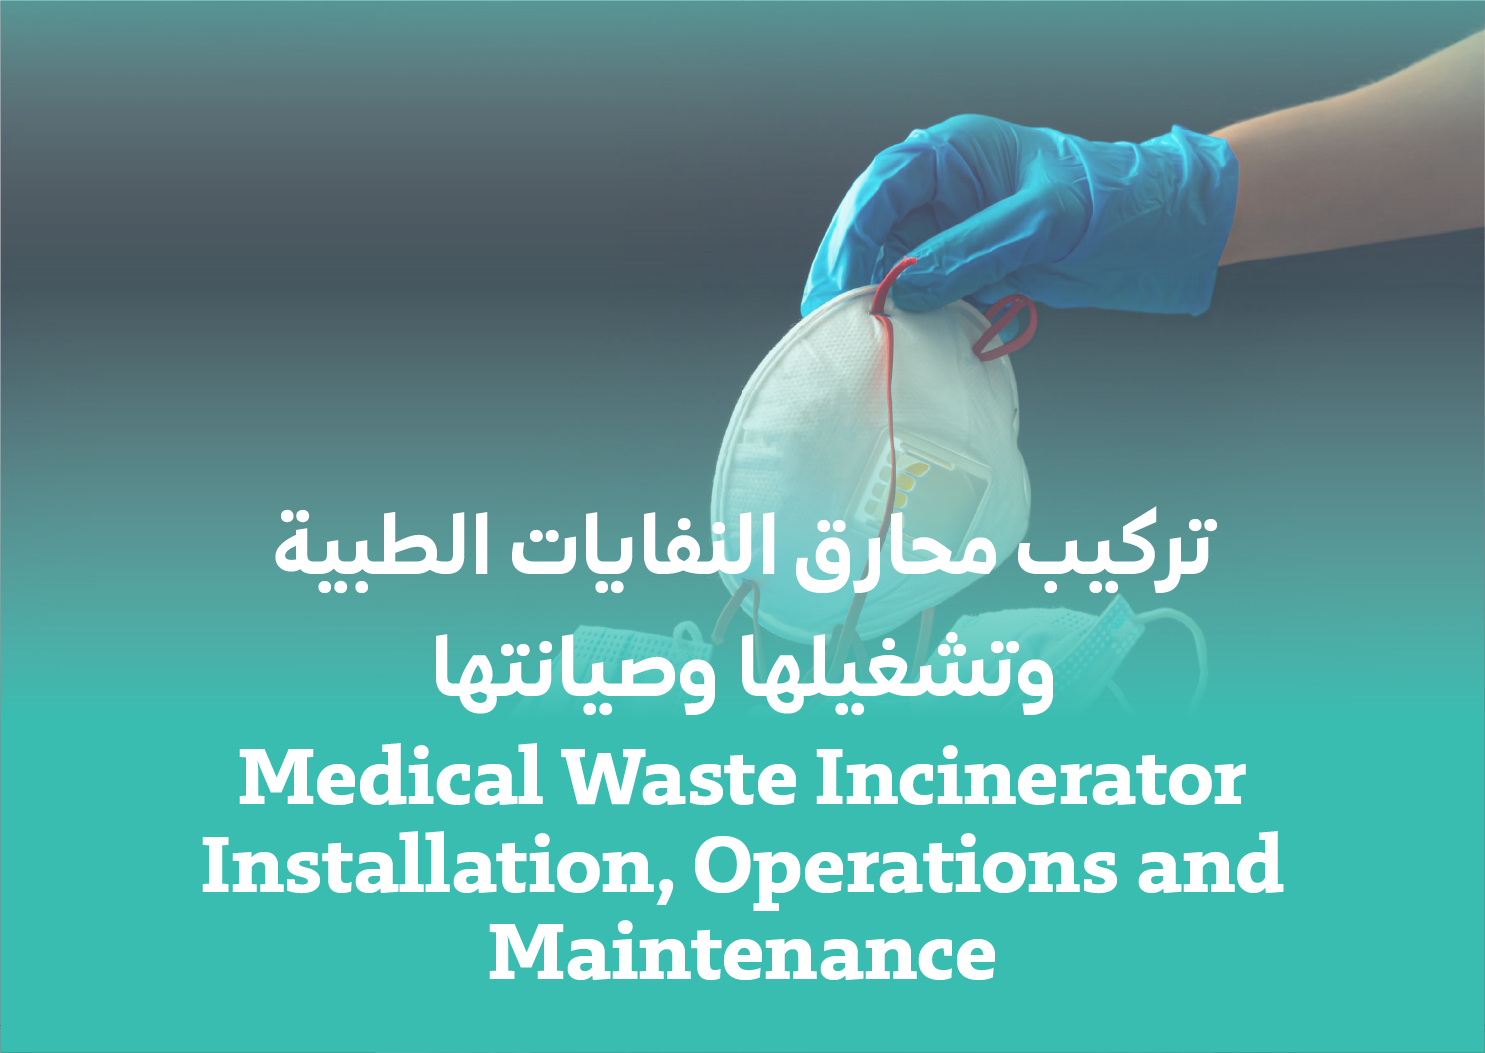 Medical Waste Incinerator Installation, Operations and Maintenance